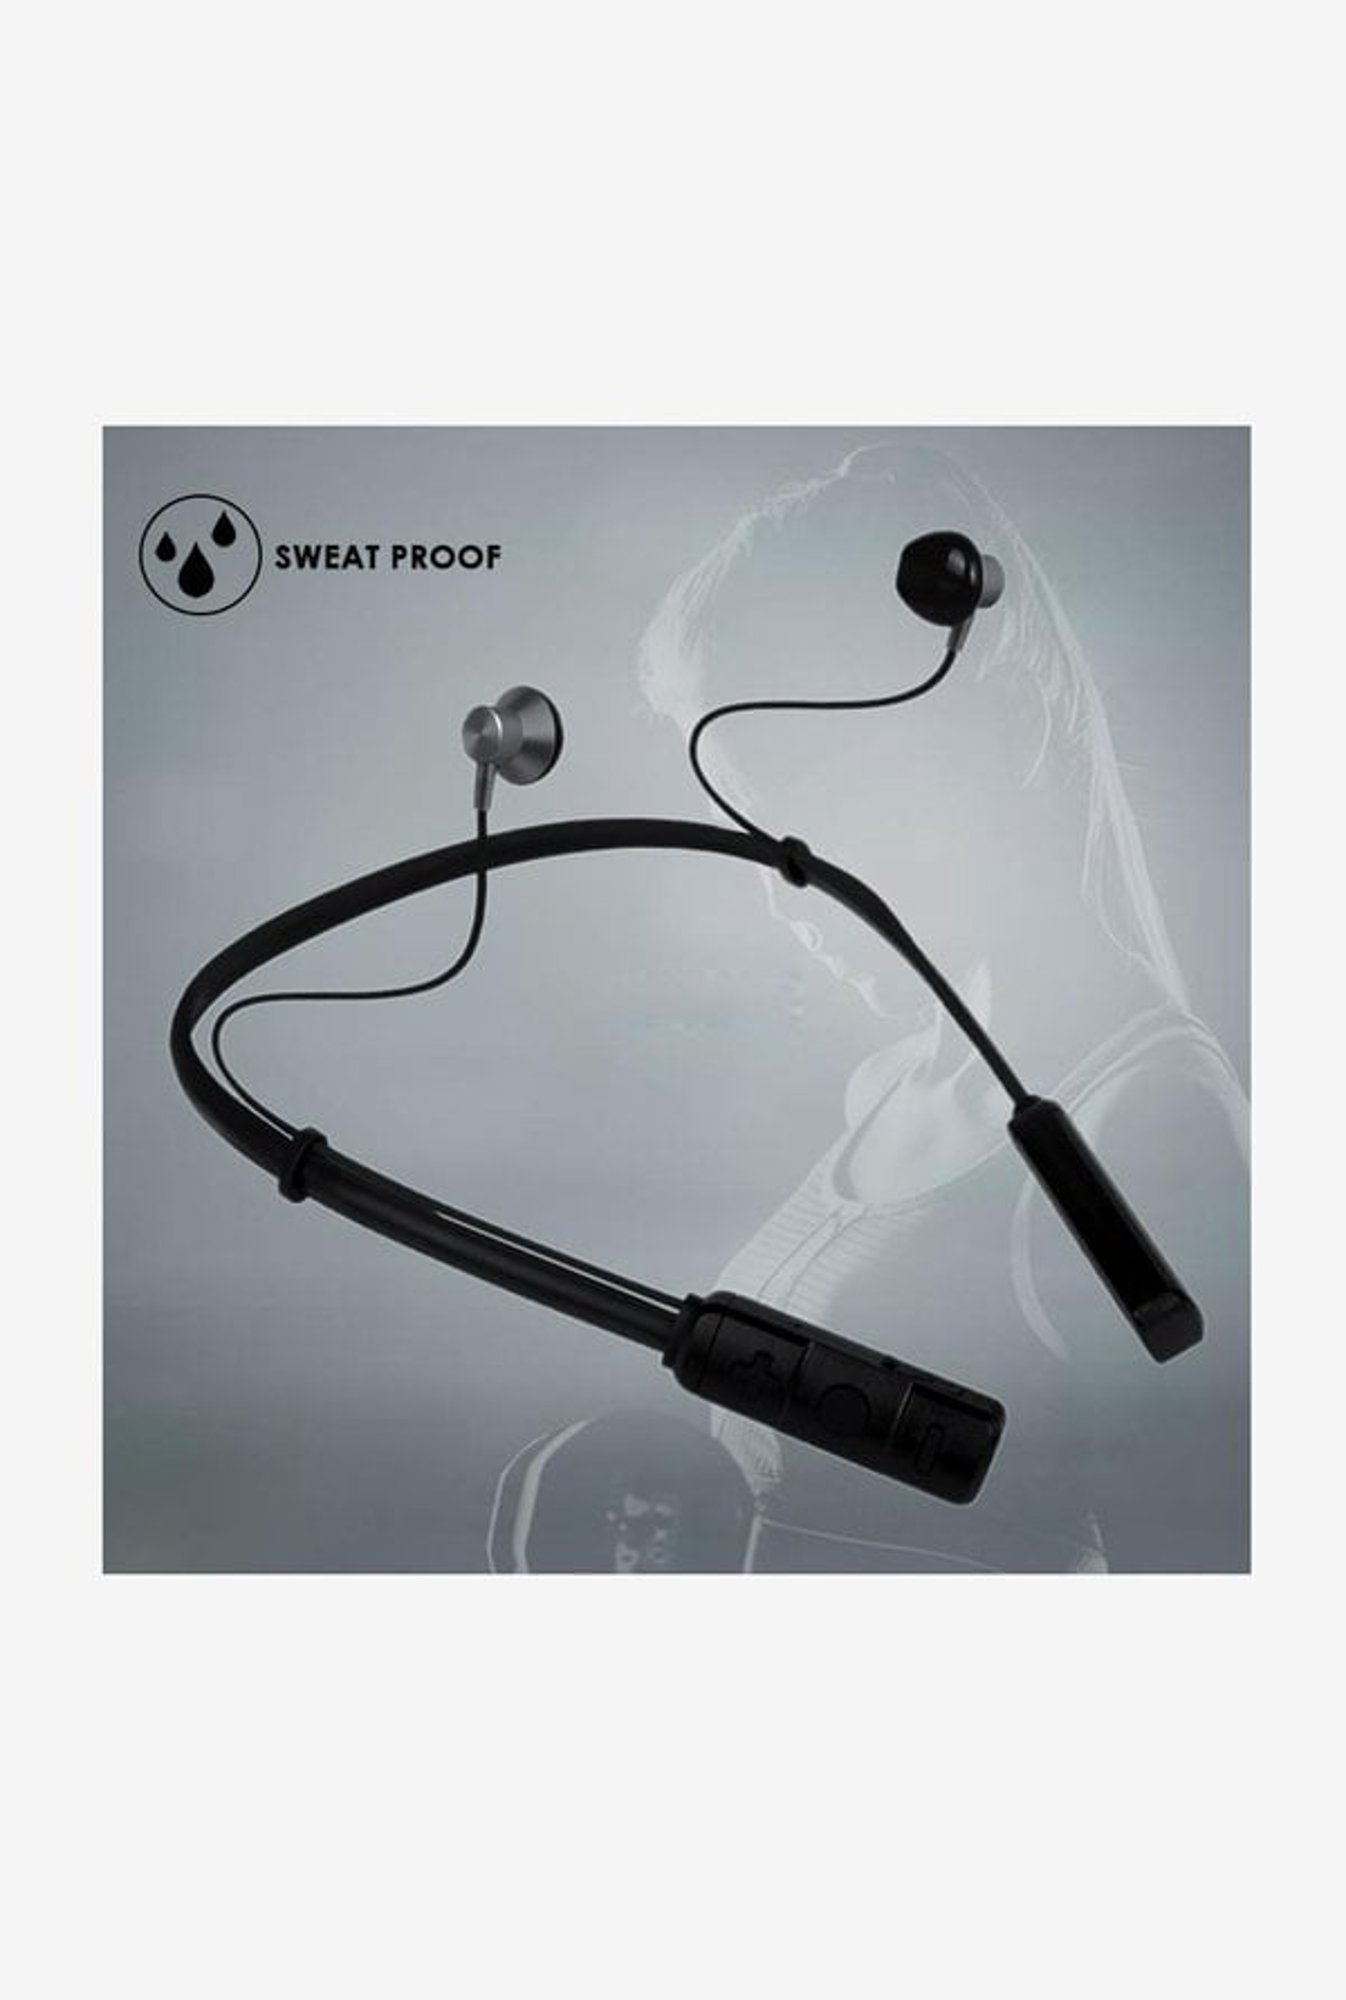 ptron tangent pro bluetooth headset review